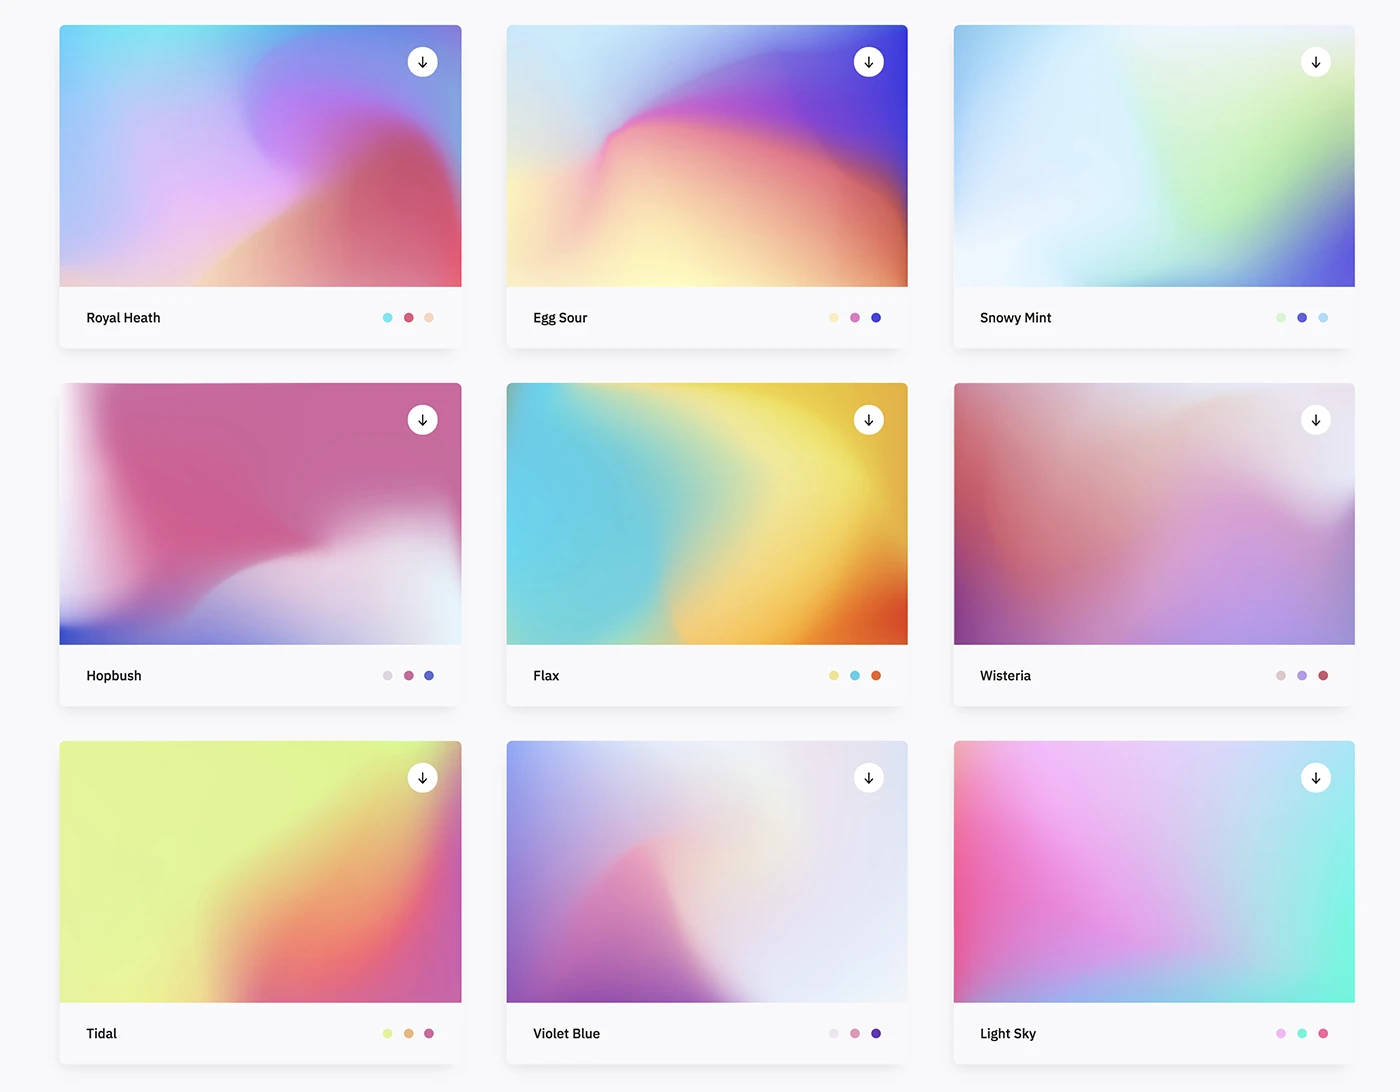 Mesh Gradients Collection - 100 mesh gradients in .sketch, .webp, .ai, .webp, .eps. Download and use in your commercial and personal projects.